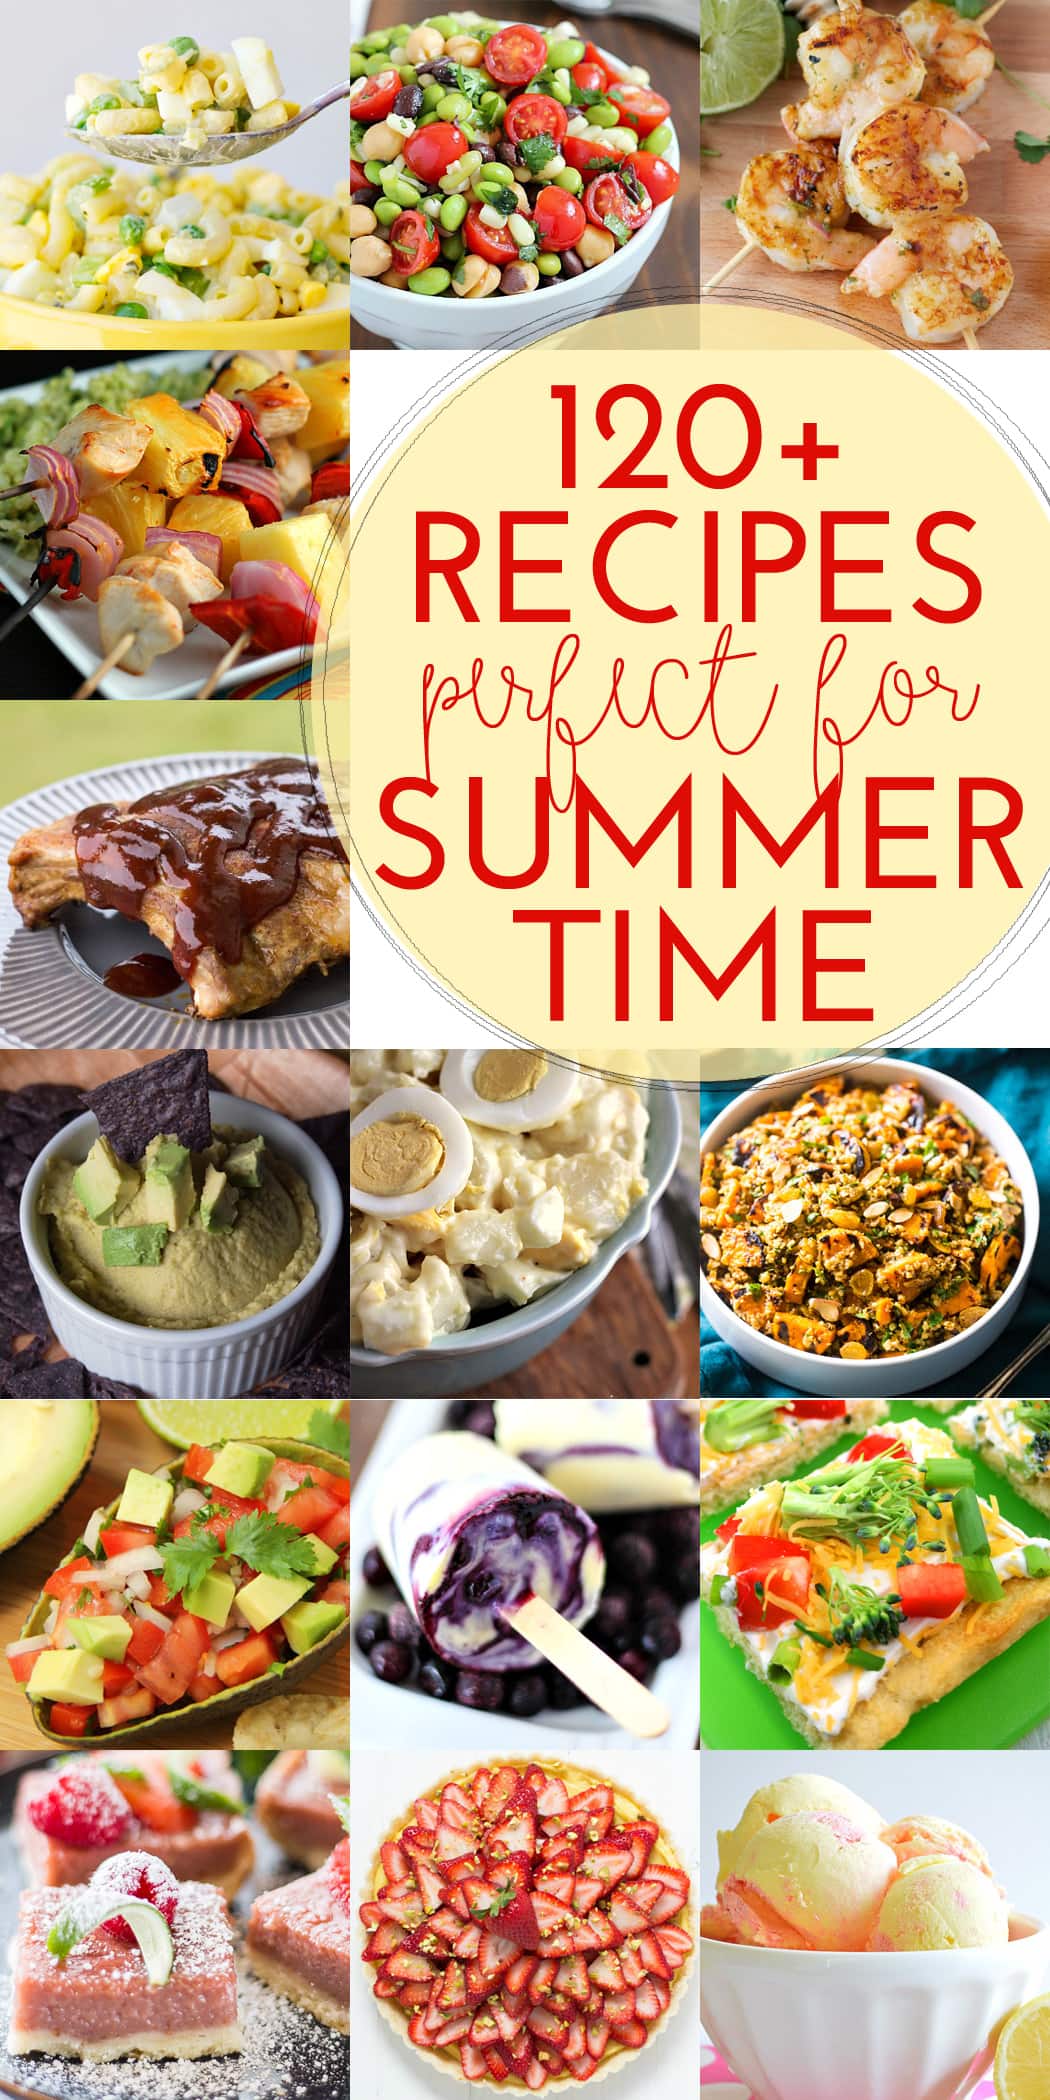 120+ Recipes Perfect for Summer - Diary of A Recipe Collector